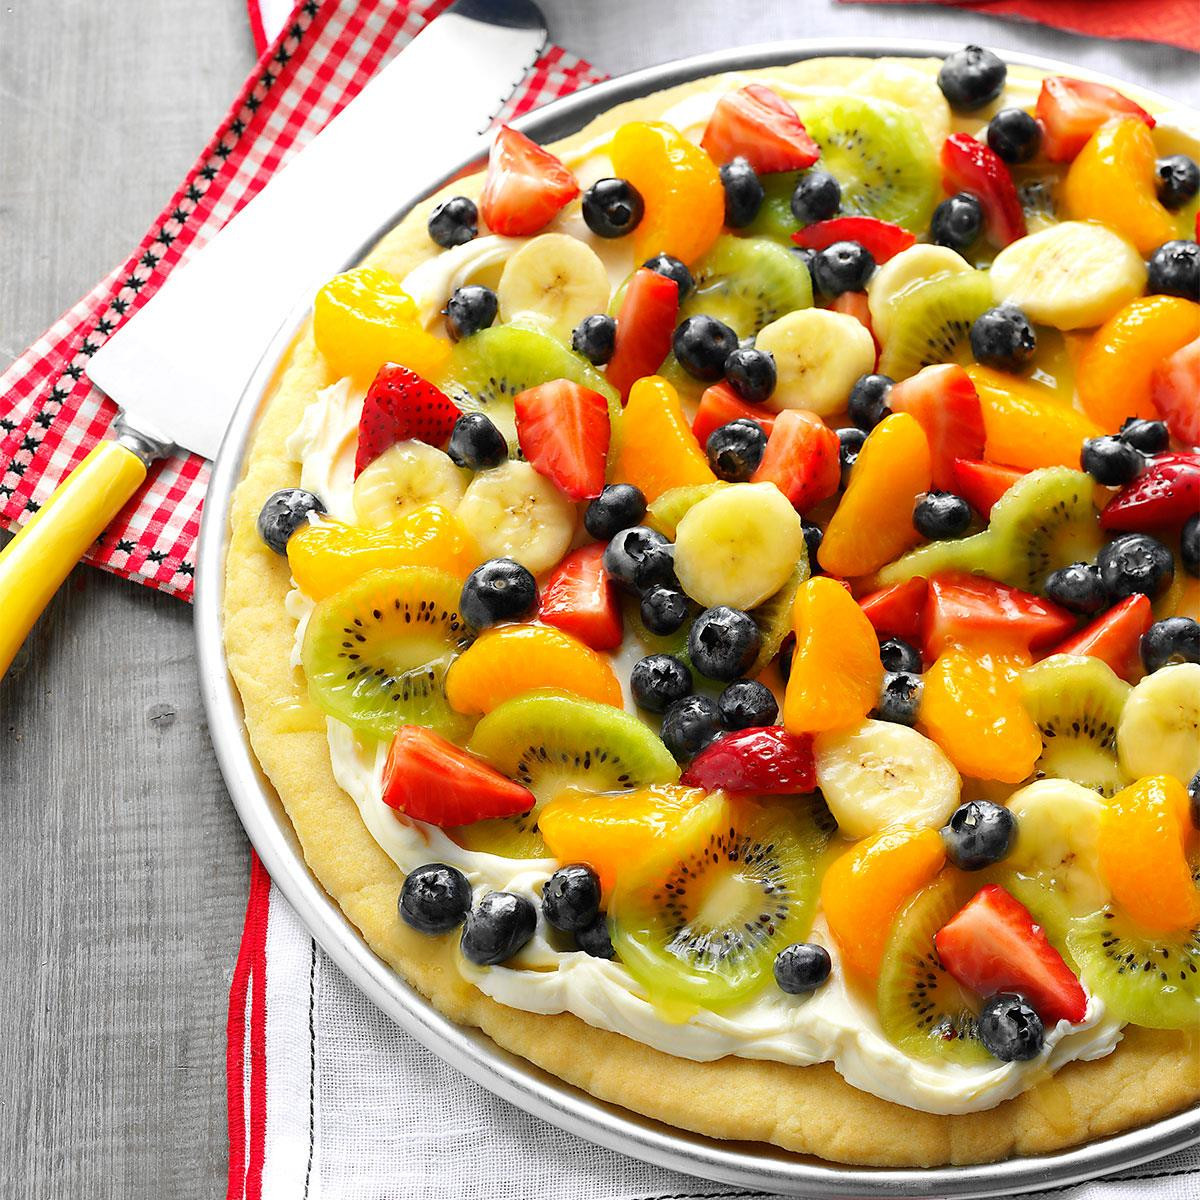 Summer Fruits Dessert
 Delicious Summer Desserts to Keep Your Patio Season Sweet